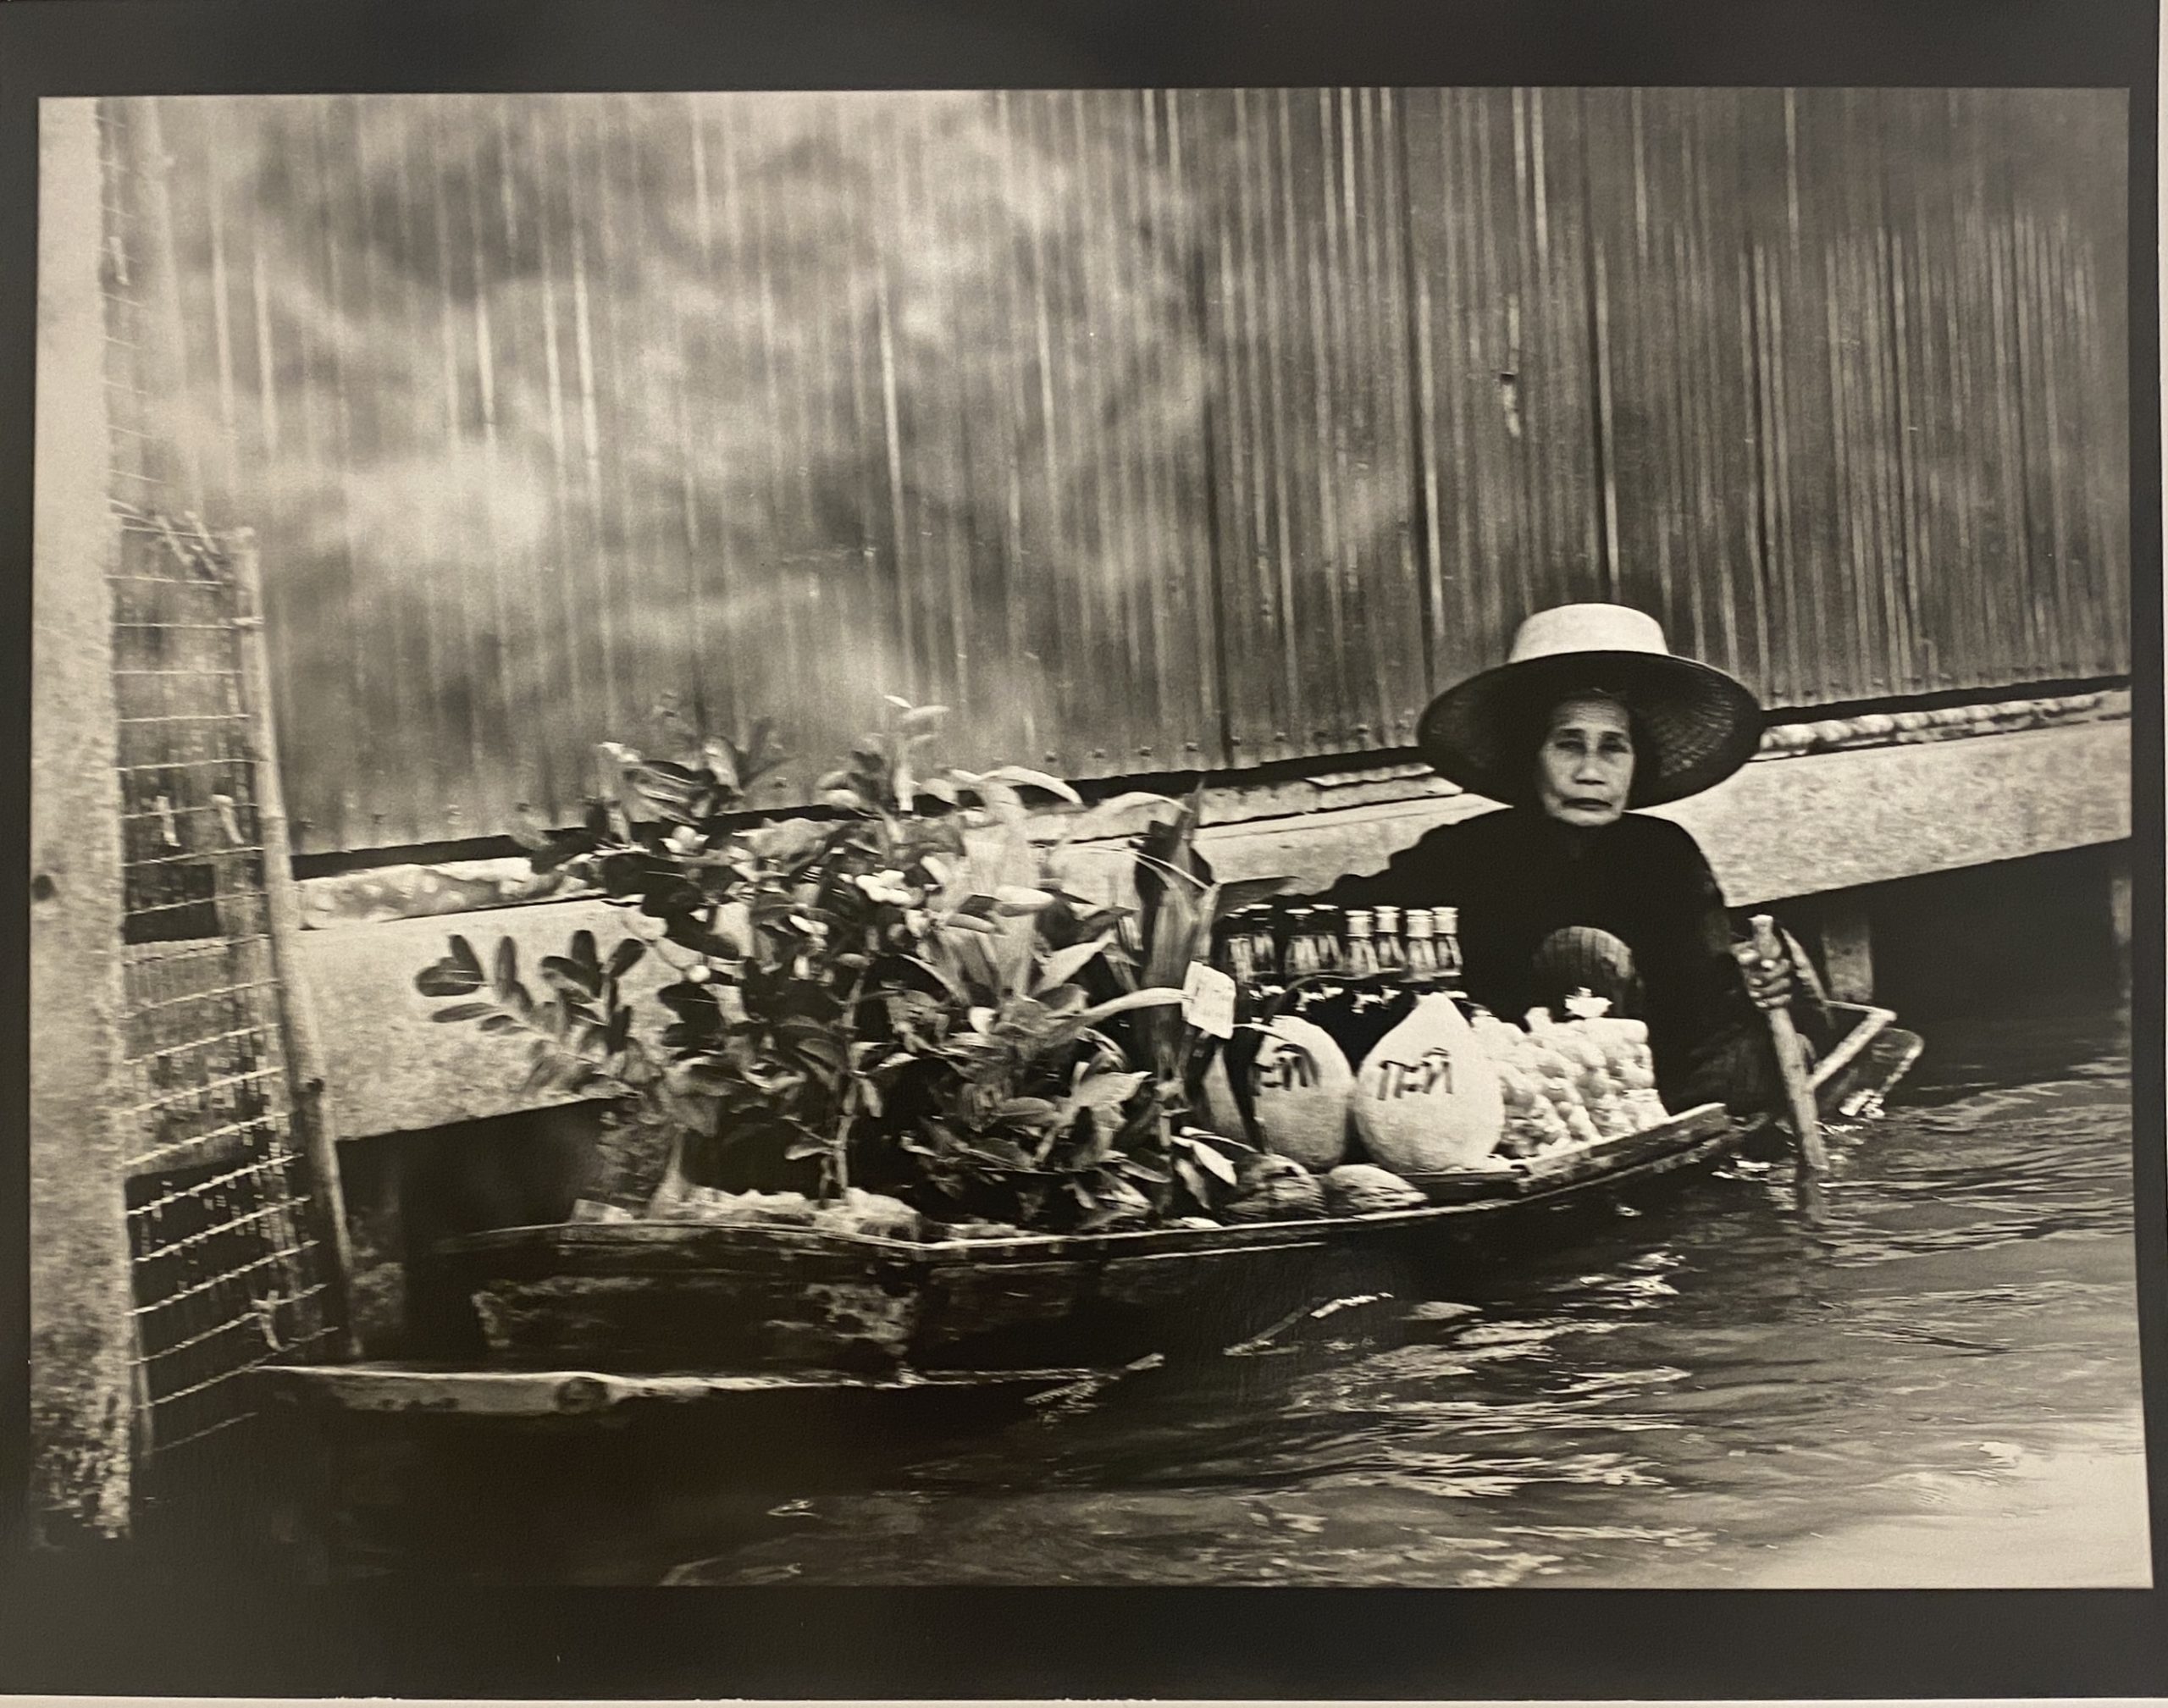 A woman in a boat with many items on it.